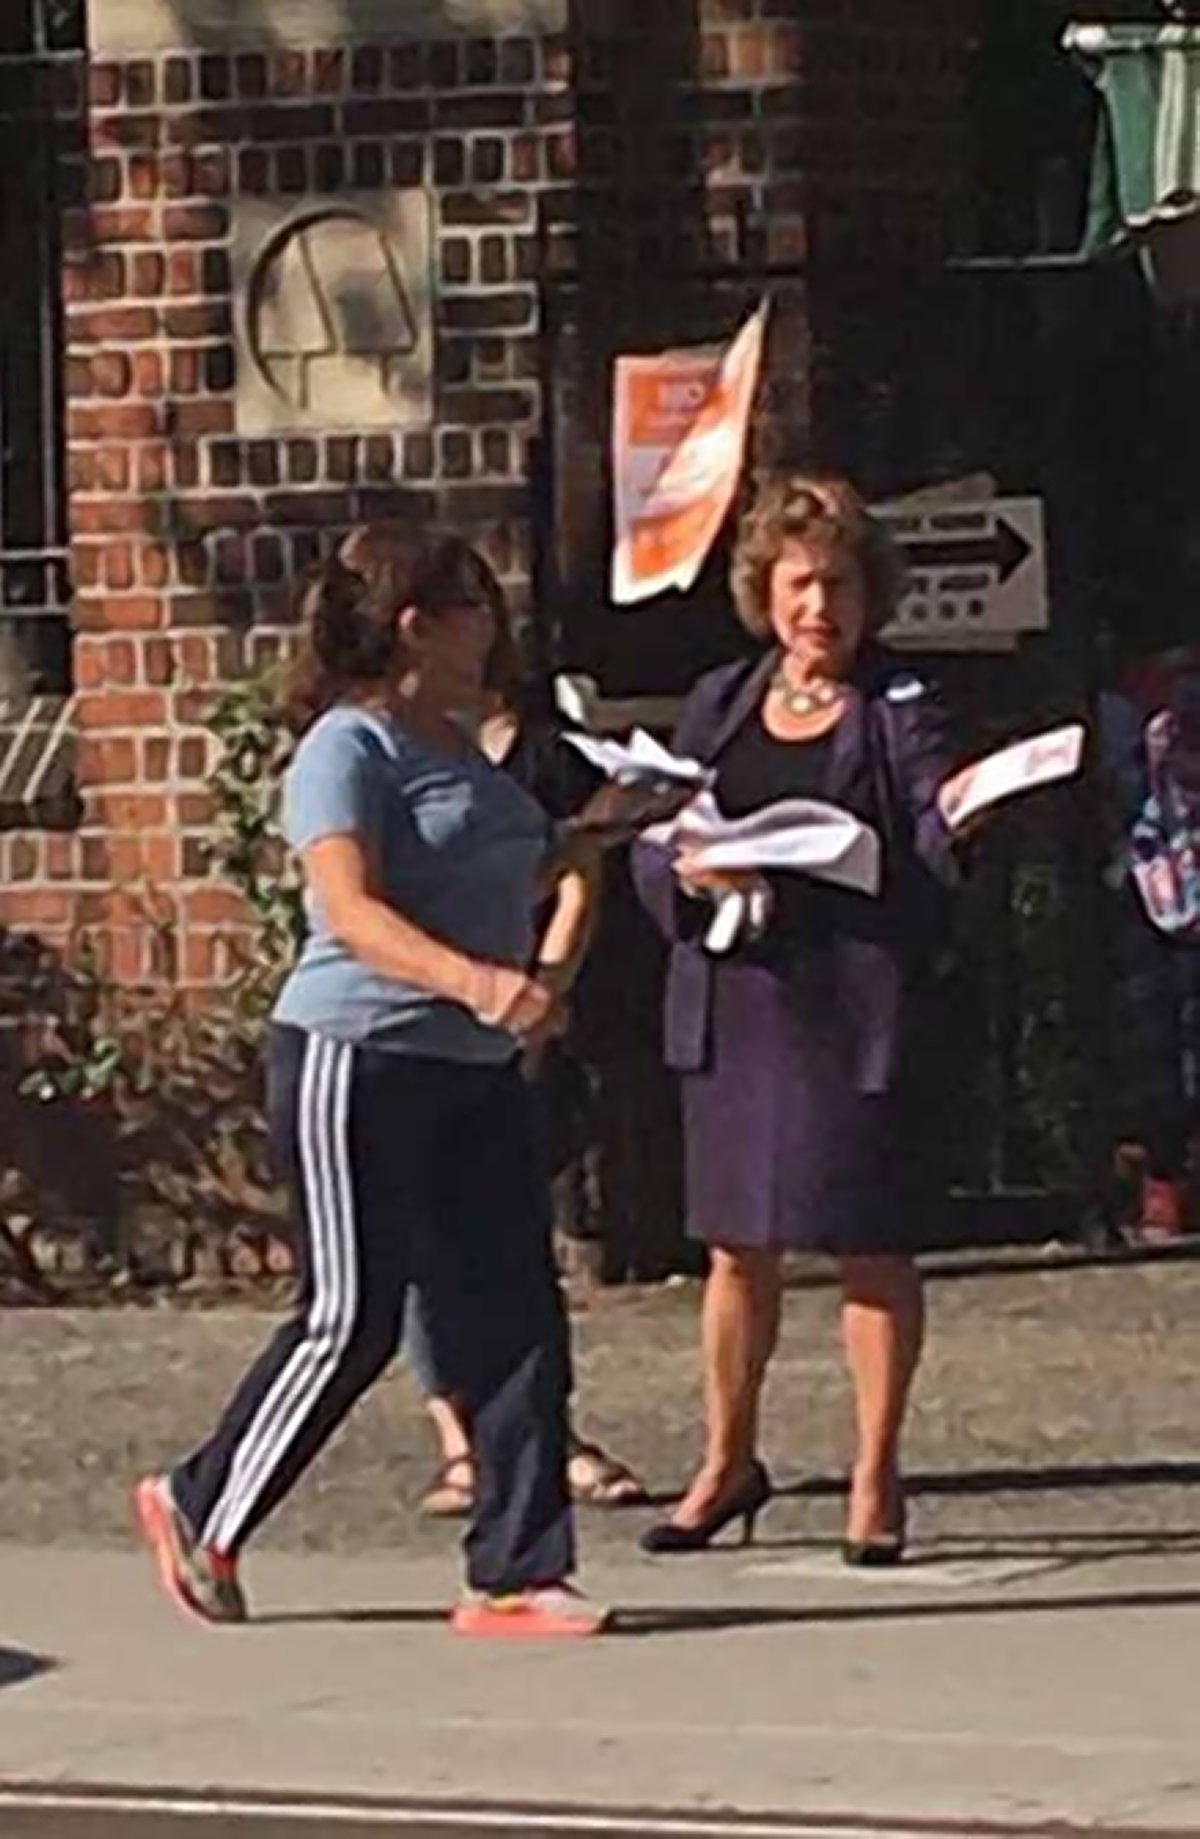 Judy Rapfogel handing out fliers for Alice Cancel for Assembly on Grand St. on Tuesday. Photo by Grand View